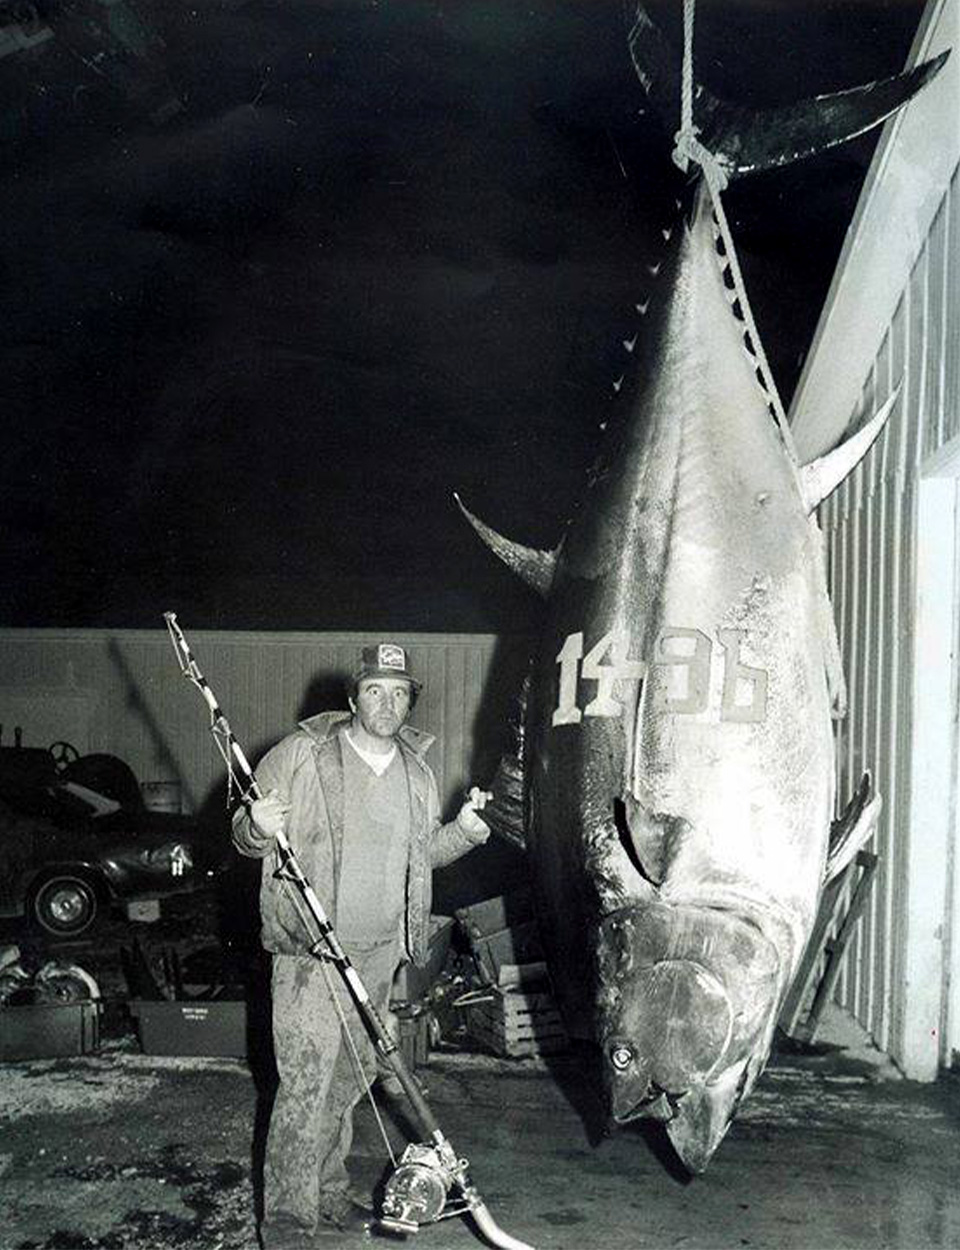 An angler stands next to the world-record bluefin tuna.